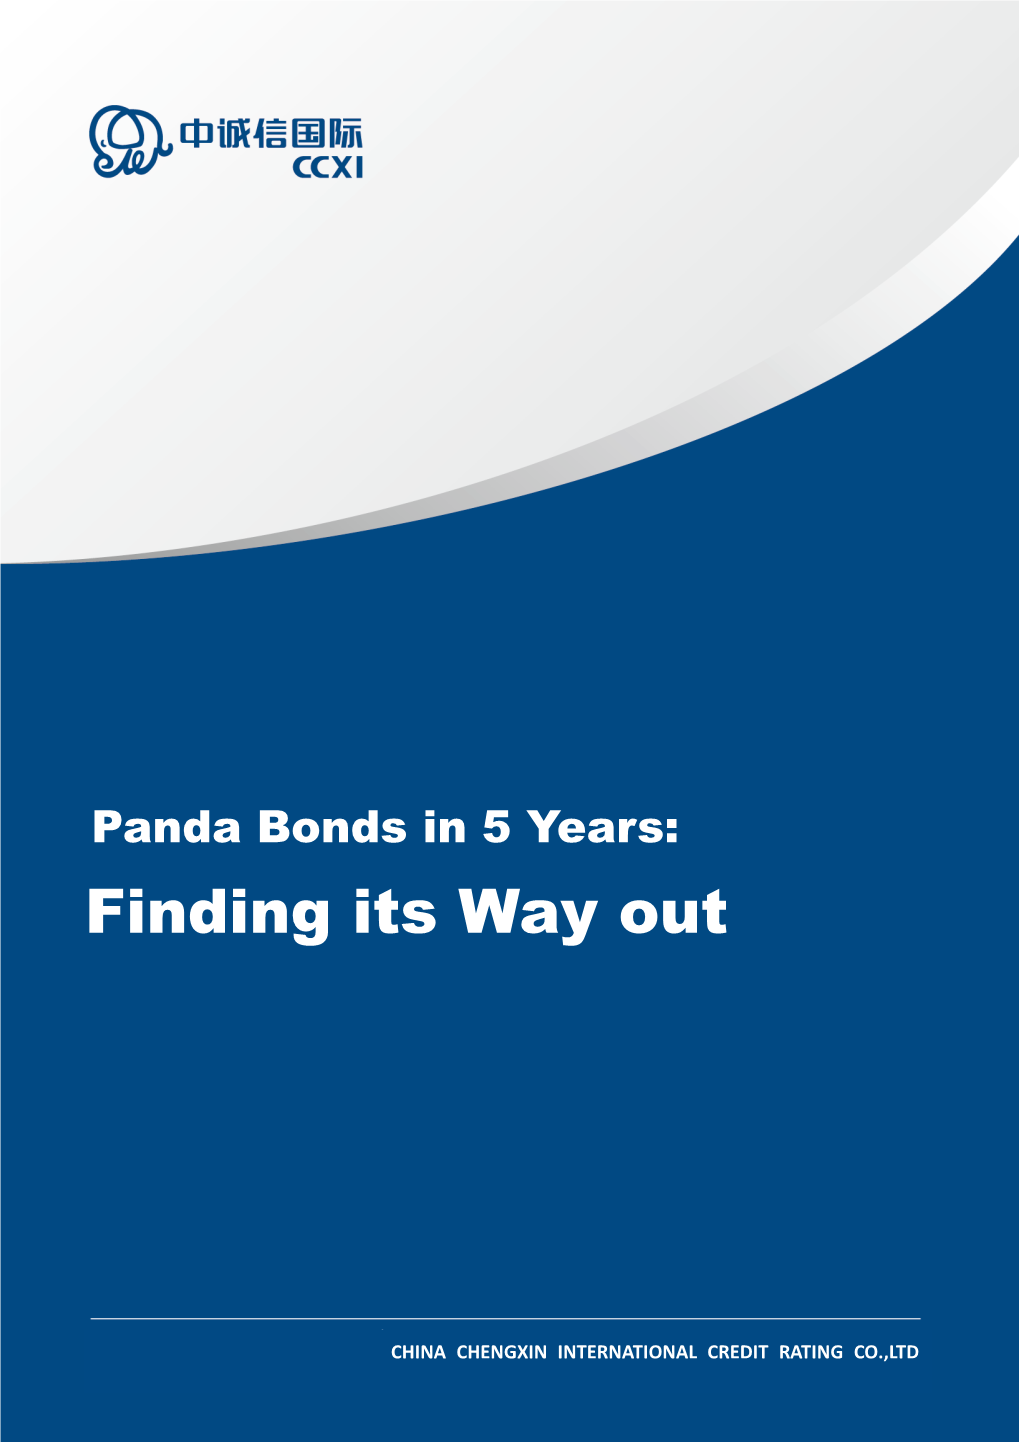 Panda Bonds in 5 Years: Finding Its Way Out